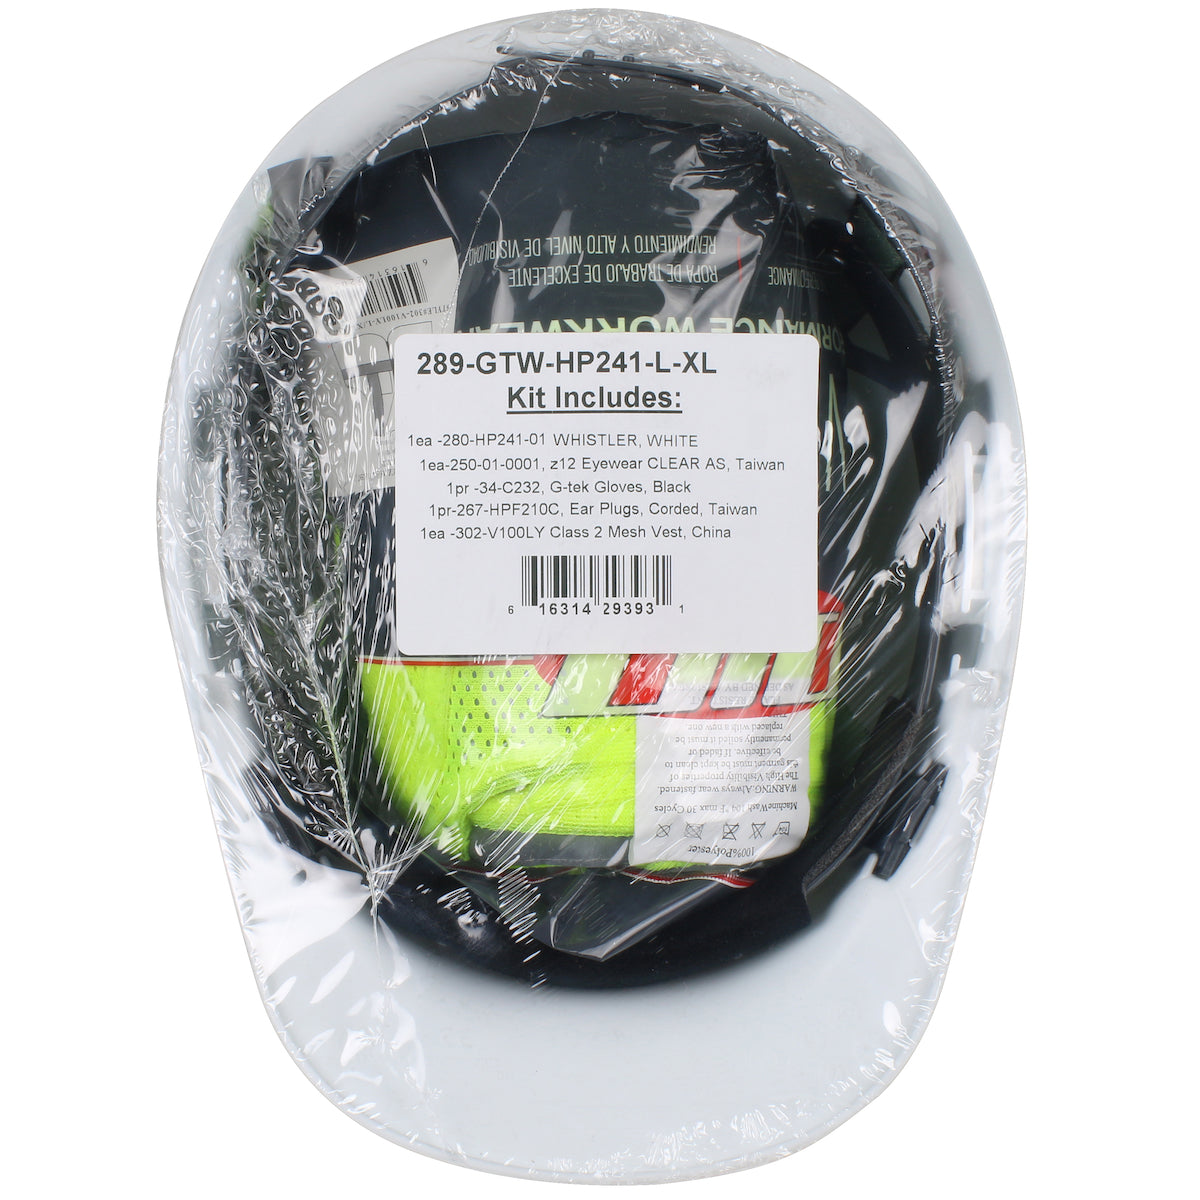 PIP 289-GTW-HP241-M/L Pre-Packed PPE Kit, HP241 Hat, Safety Eyewear, Earplugs, Gloves and Vest